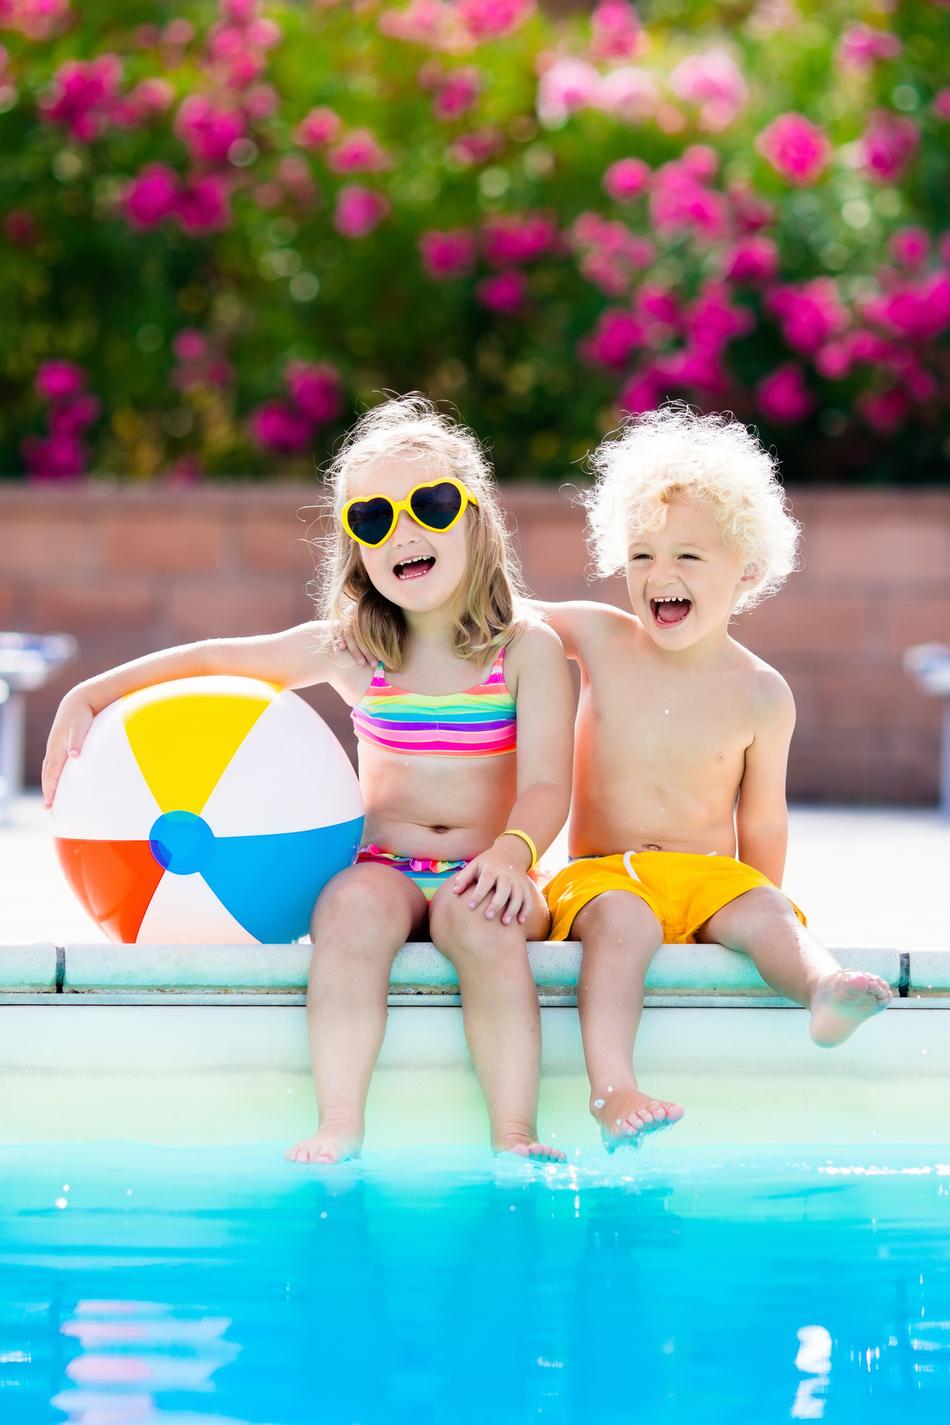 Debunking Old Wives' Tales: Summer Safety Tips for Your Kids